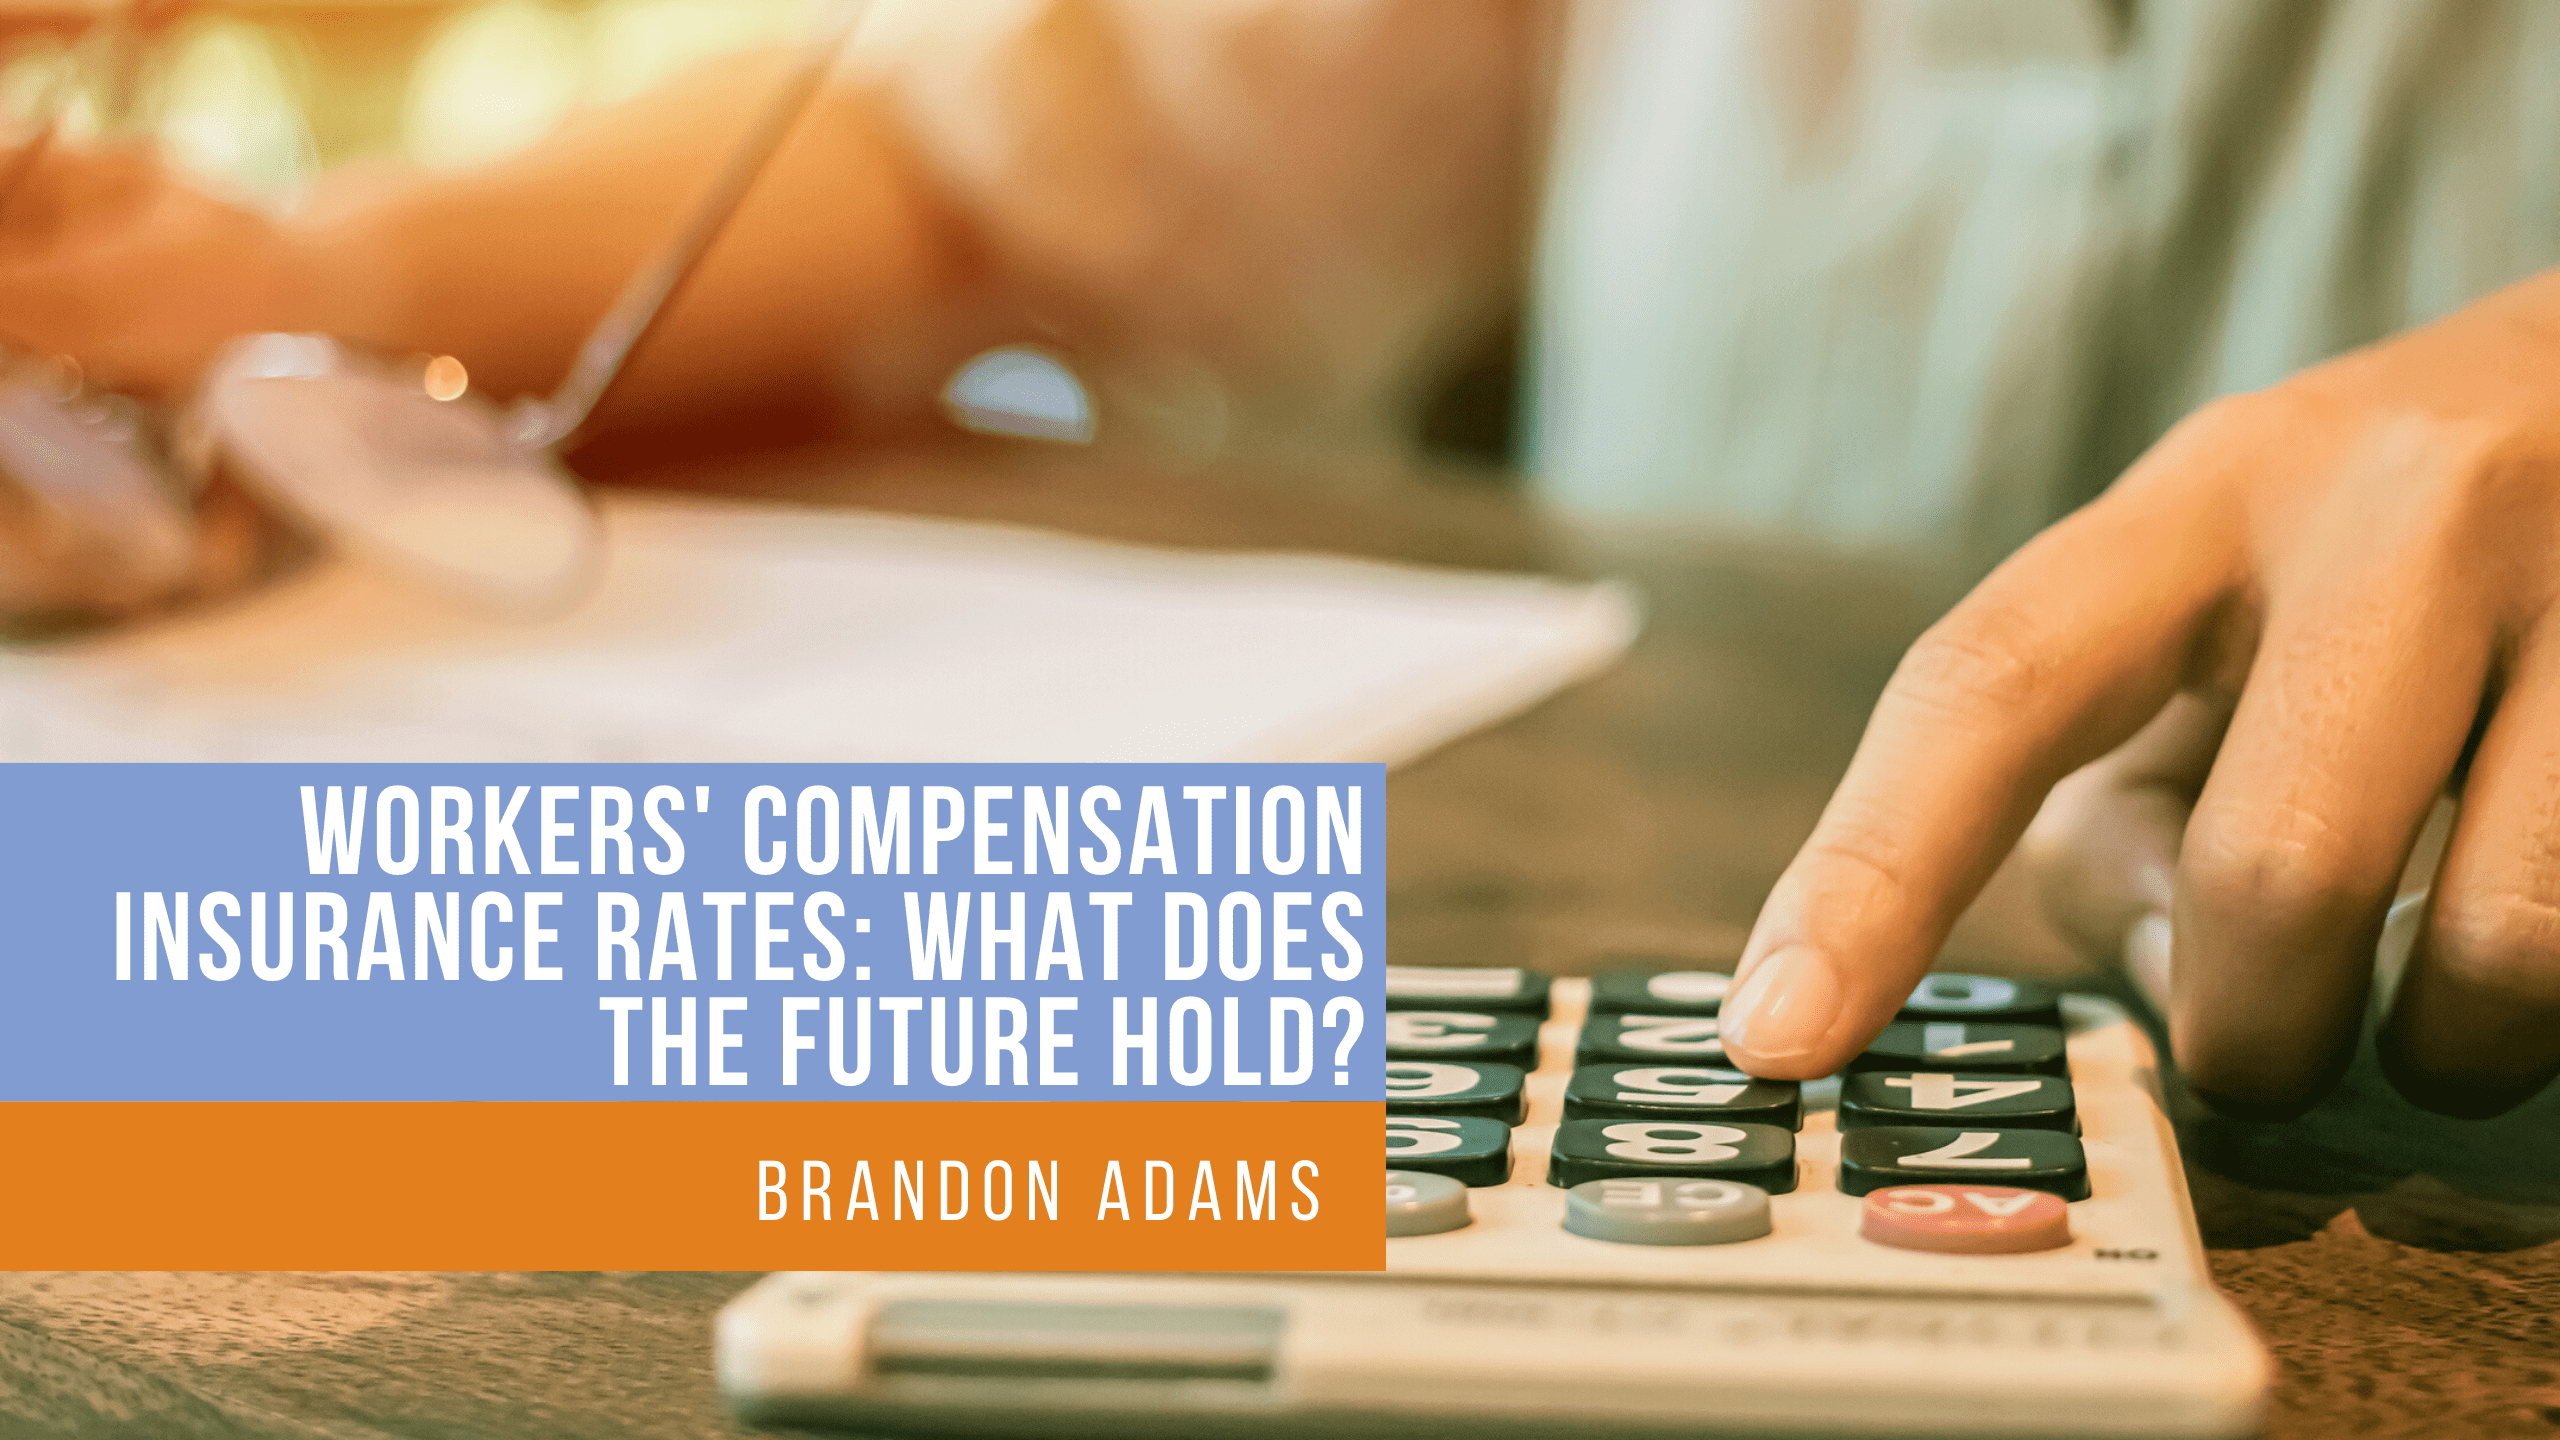 Workers Compensation insurance rates: What does the future hold?